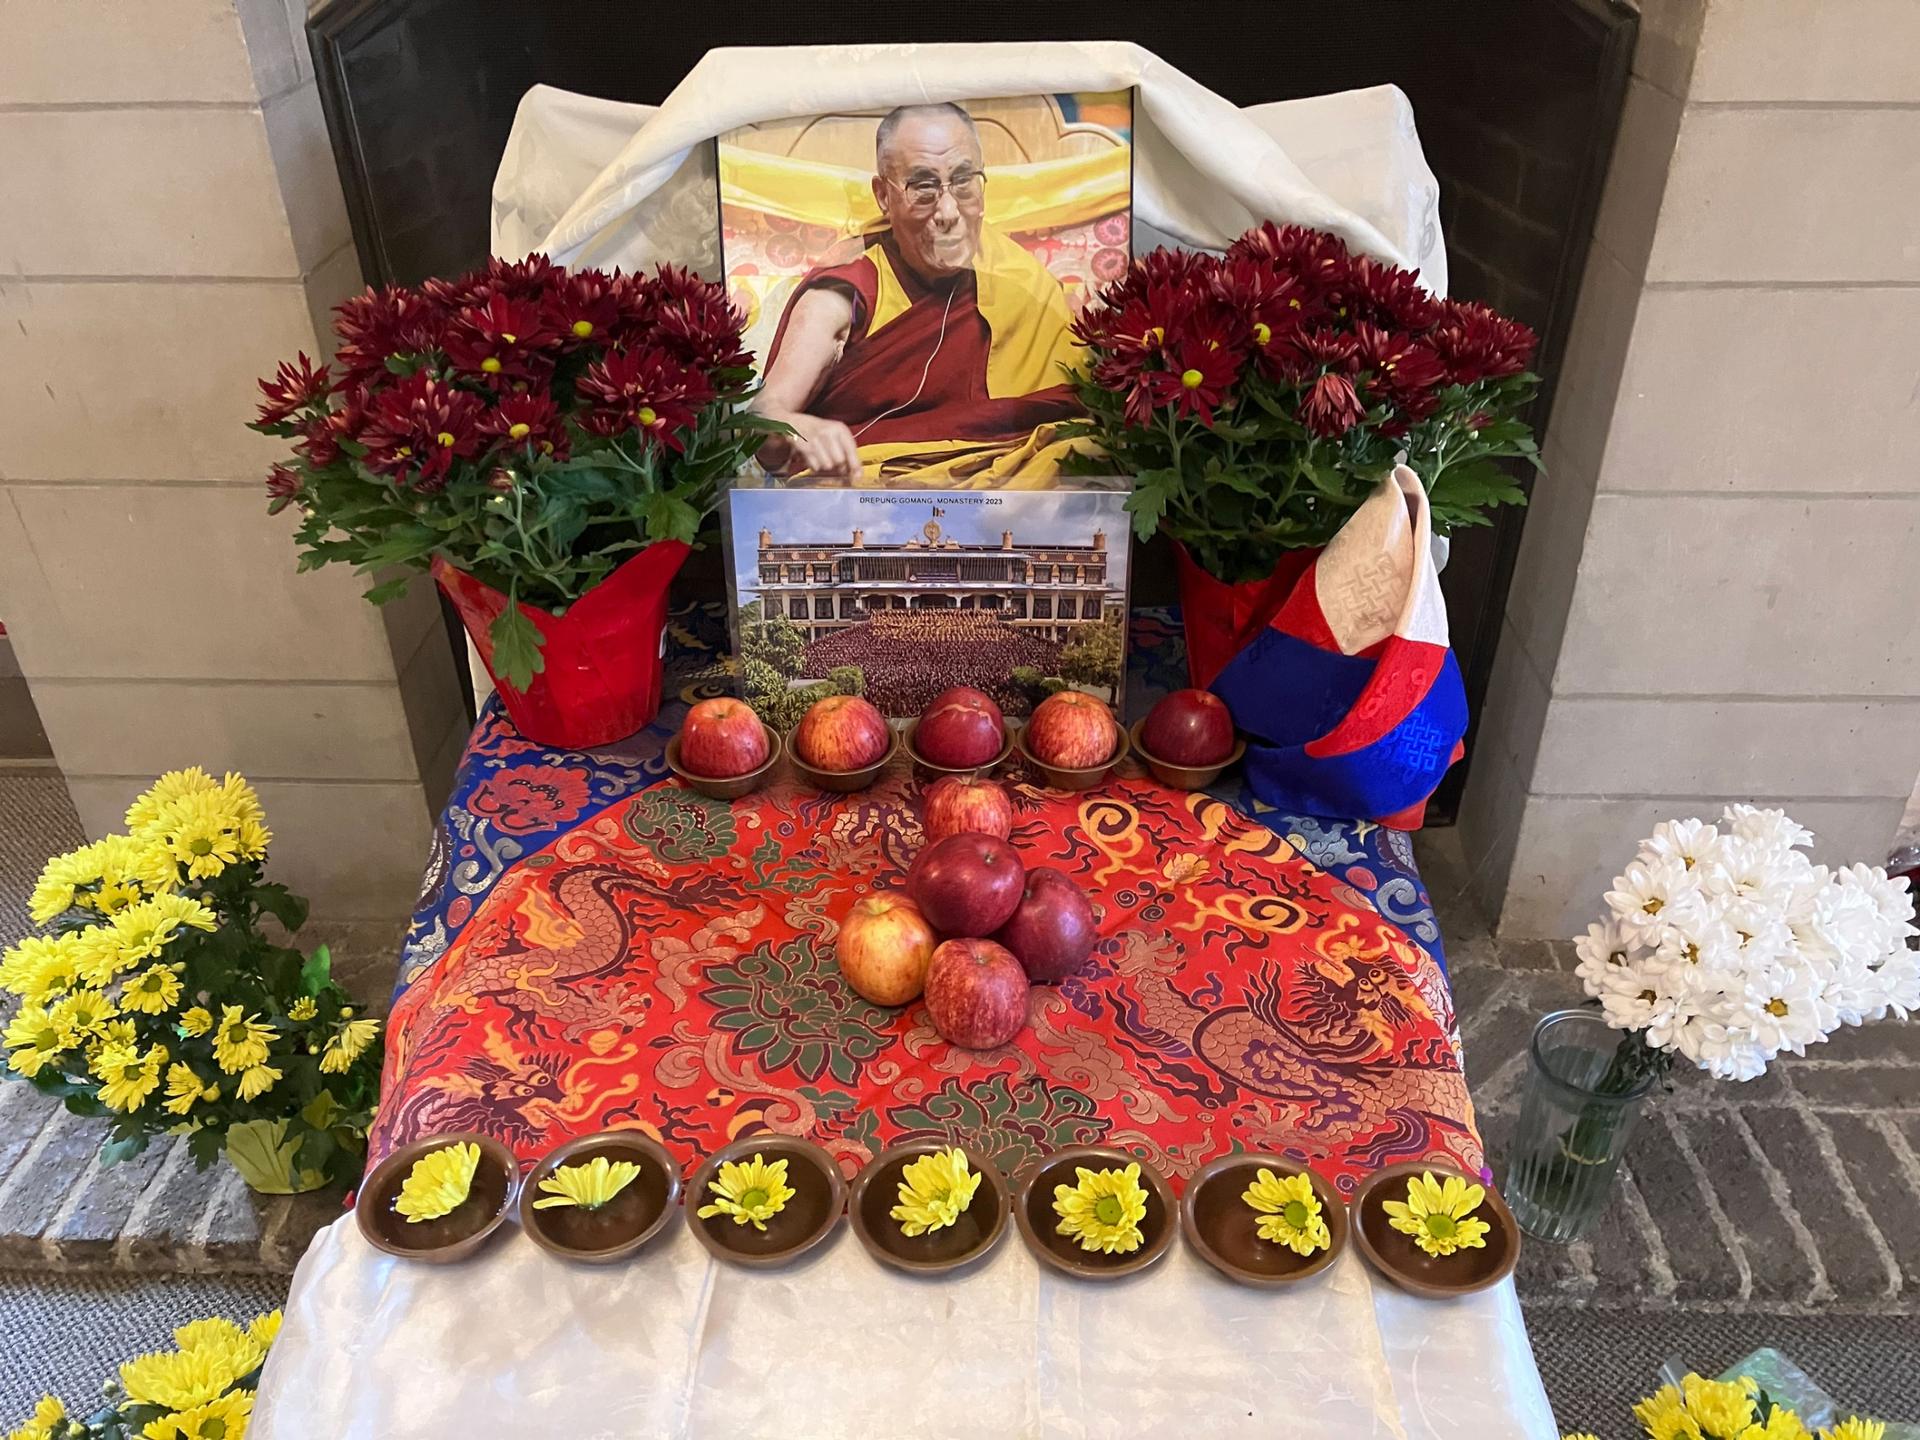 A shrine to the 14th Dalai Lama is set up in the room at Lake Street Church, where the monks are in residence for a week. 